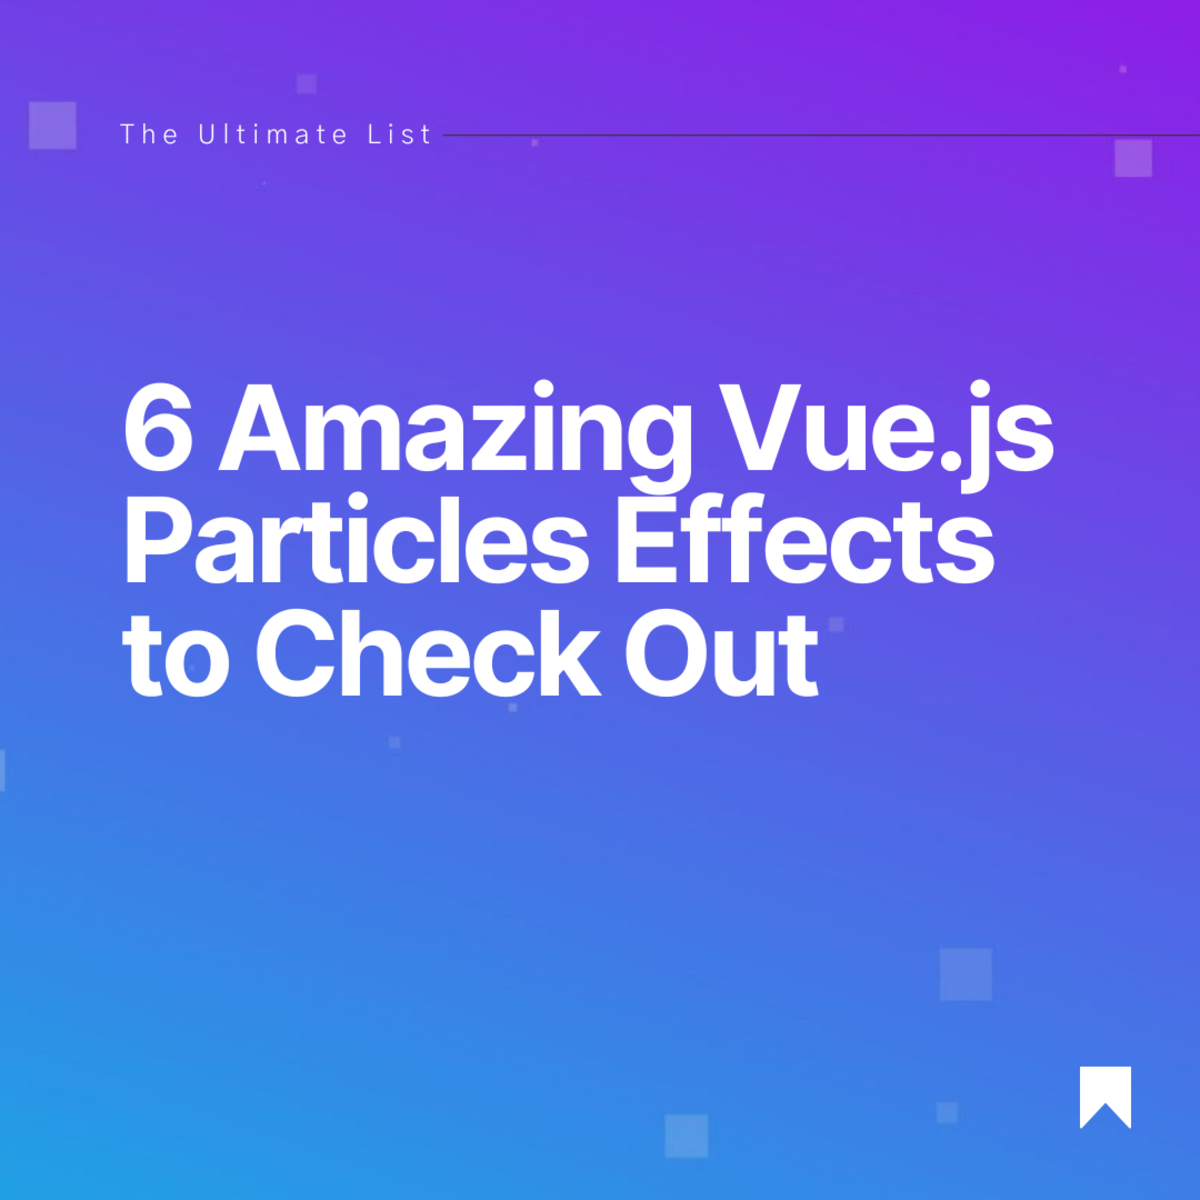 Discover lots of stunning Vue.js particles effects in this comprehensive list!